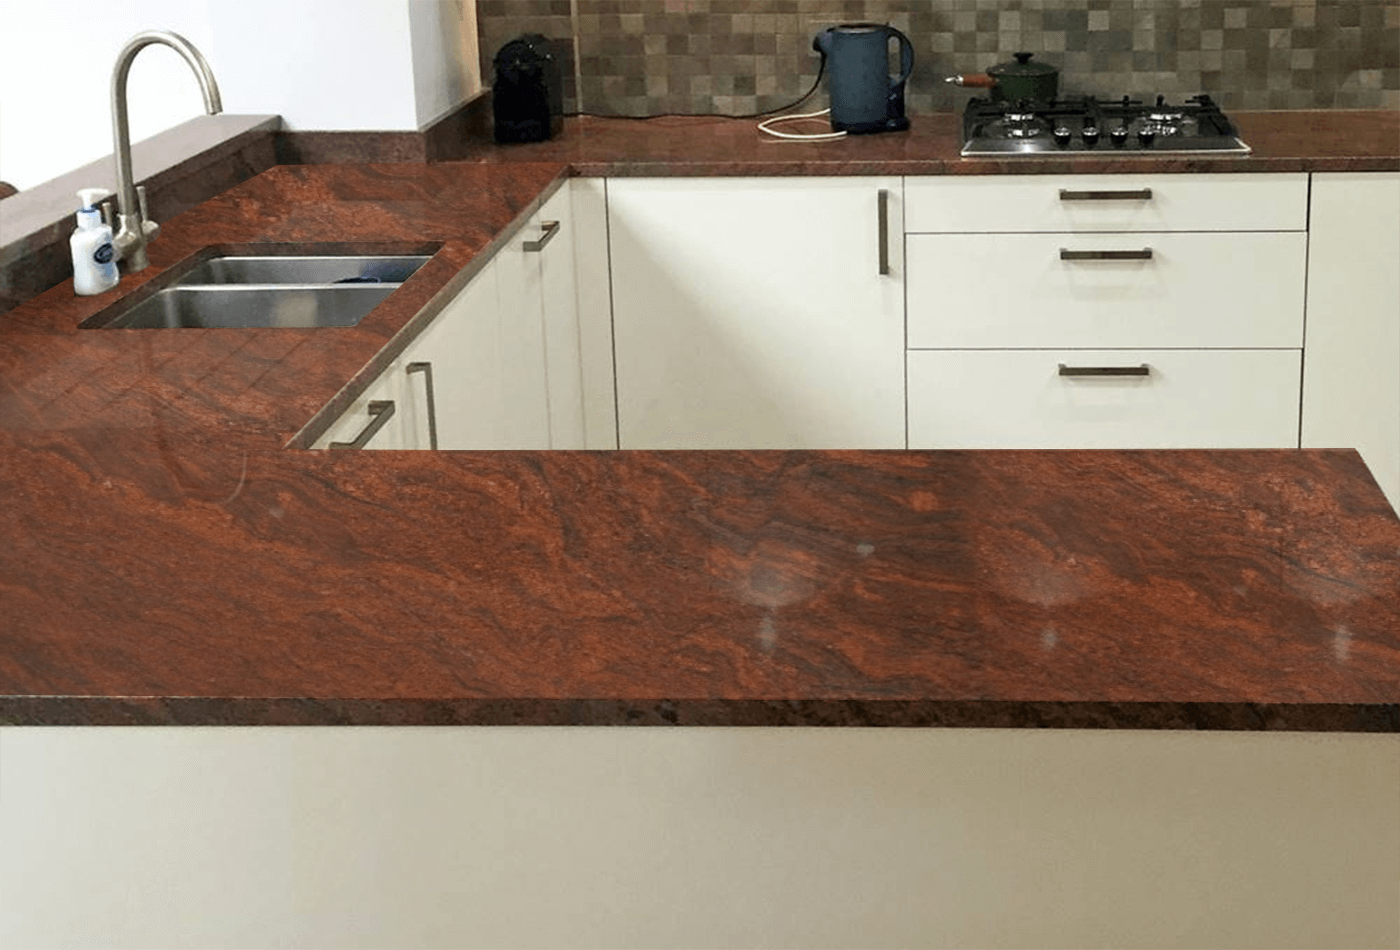 Red Multicolour Granite; Best Styling Stone for Your Kitchen